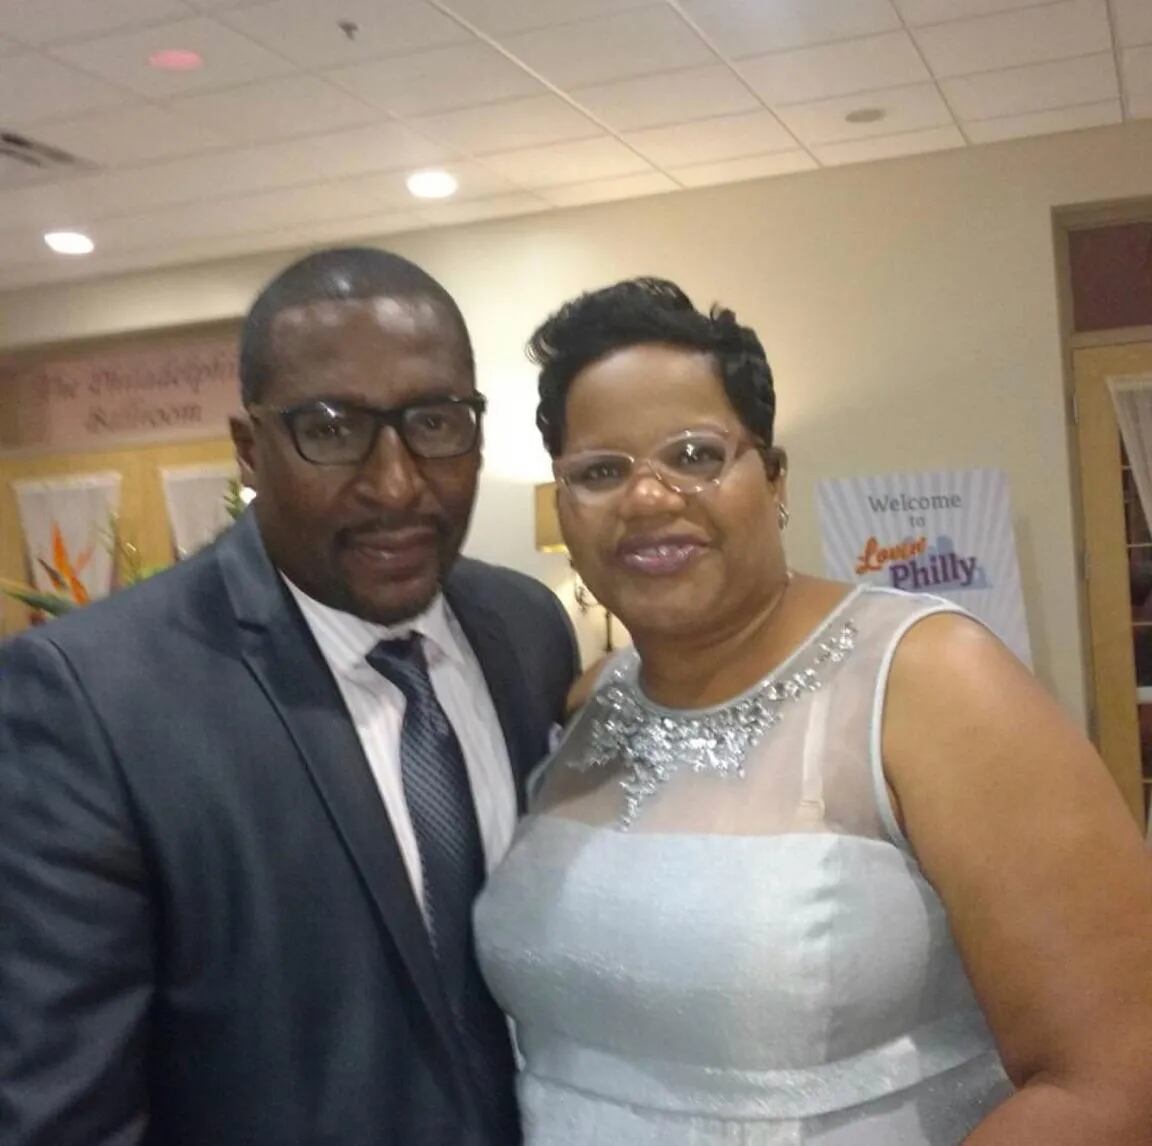 Janet Woodson and Leslie Holmes were married in April 2018, according to their family.